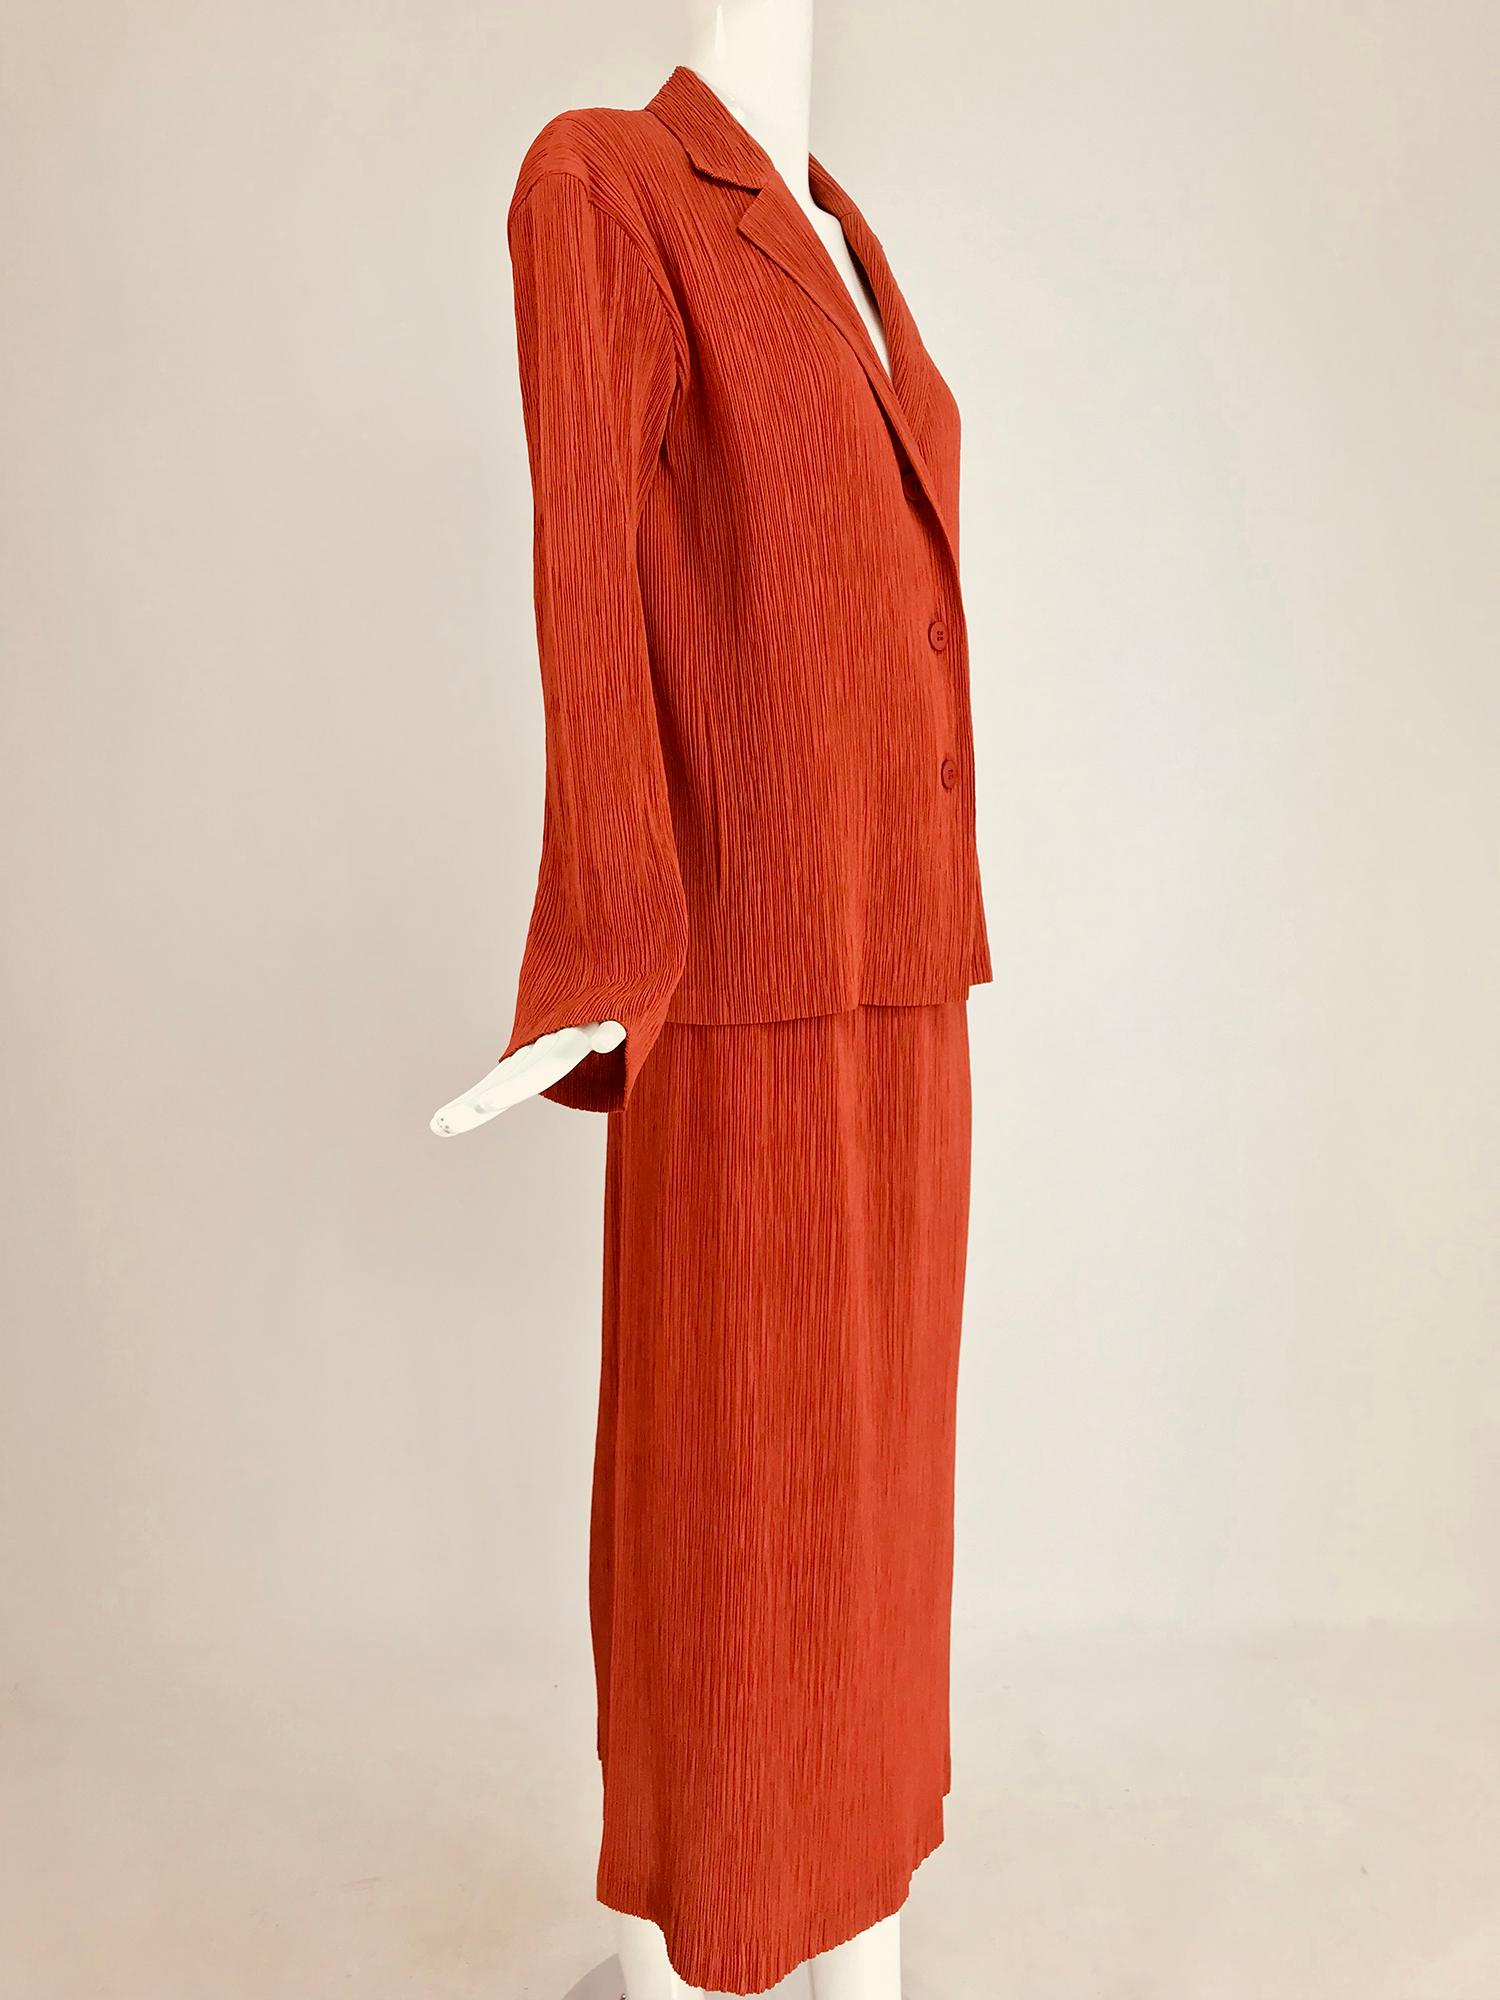 Issey Miyake Fete paprika pleated top and skirt set. Gorgeous paprika colour, long sleeve three button front blouse with notched lapels is unlined, the matching maxi skirt has a cased elastic waist and is also unlined. Marked size 4. Both pieces are